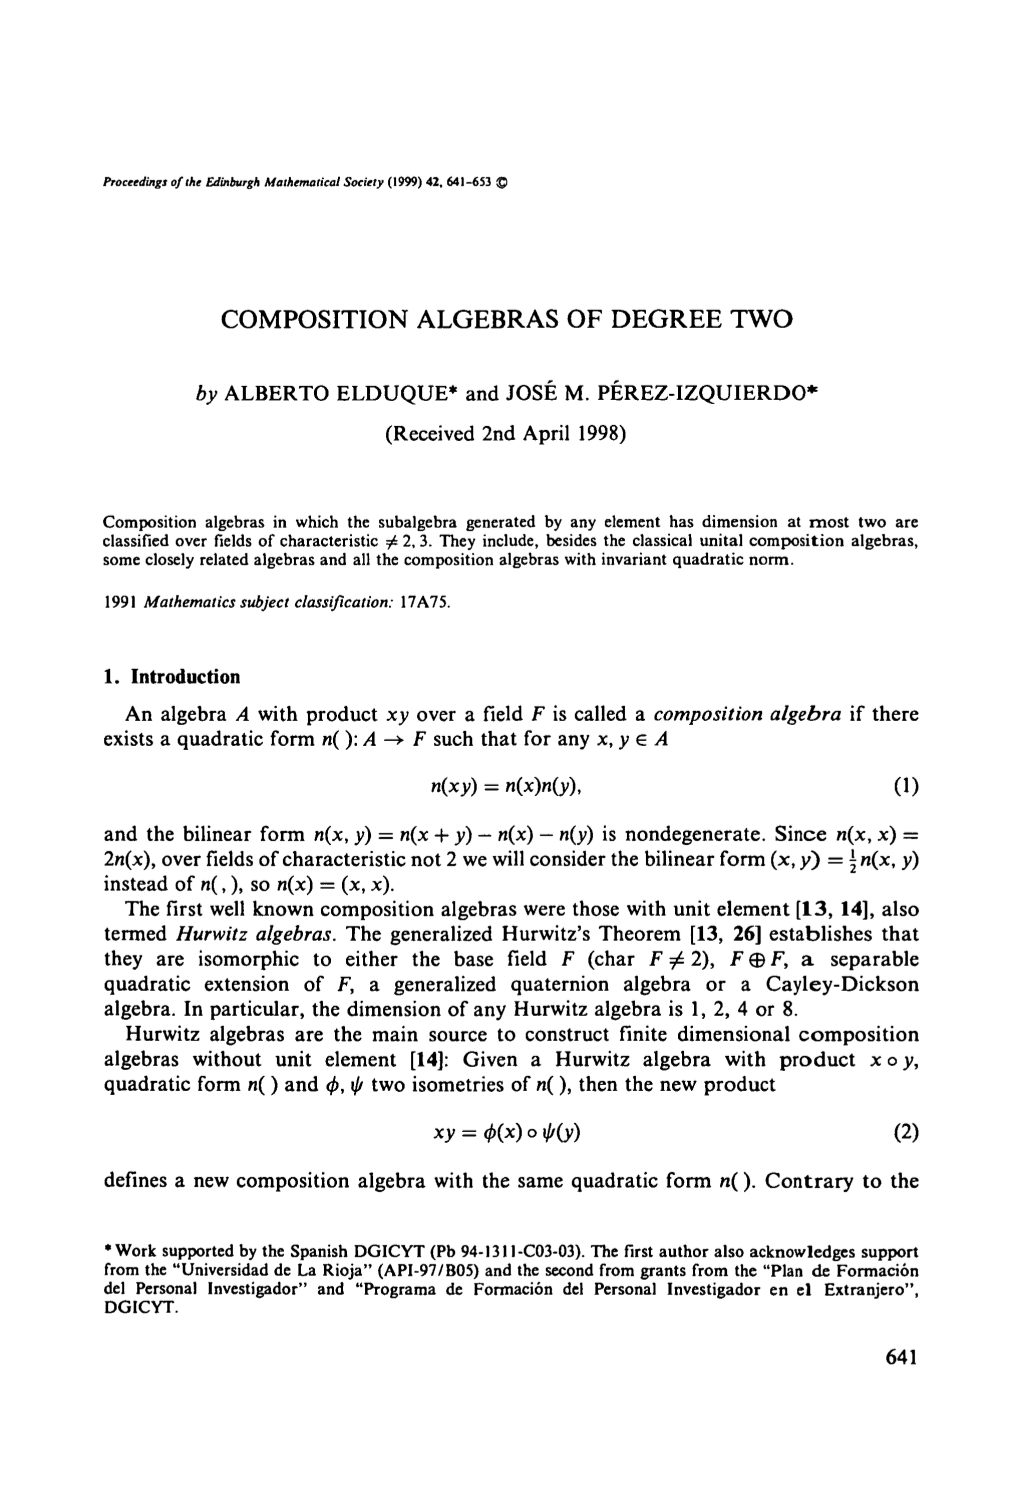 Composition Algebras of Degree Two